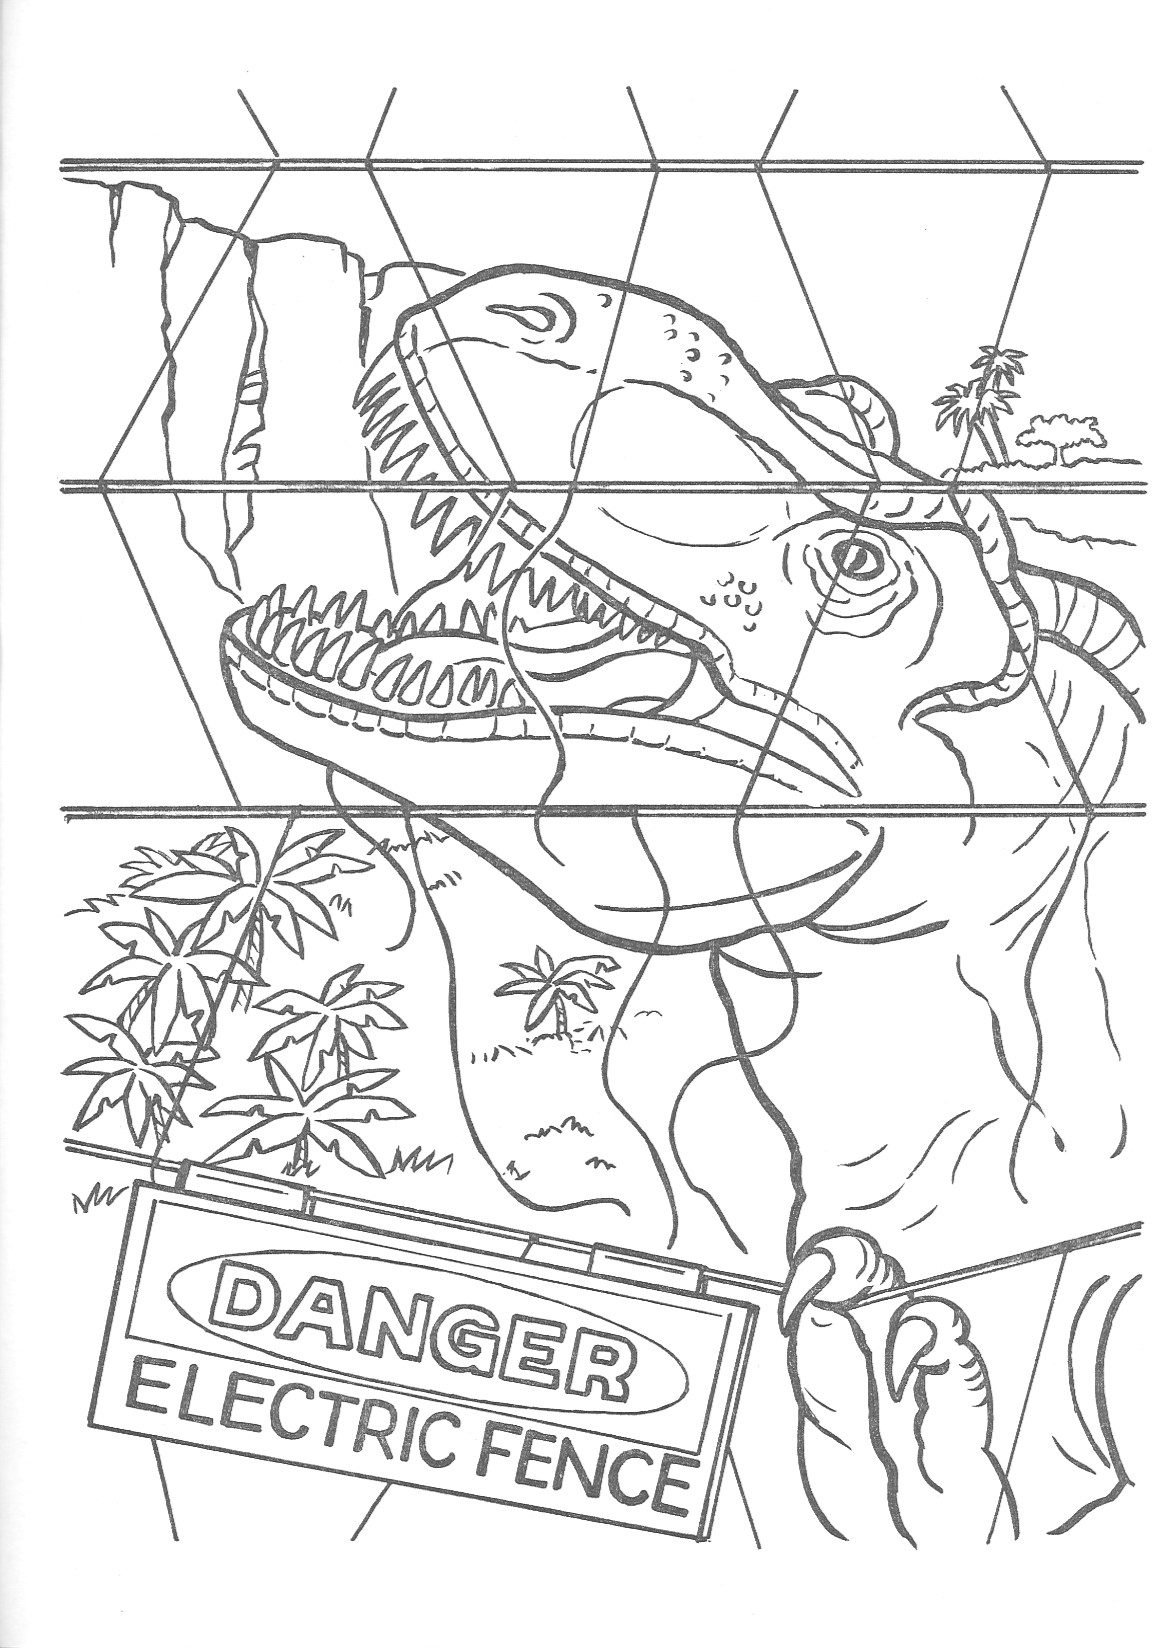 Jurassic Park Coloring Pages Free Free Printable Jurassic Park Coloring